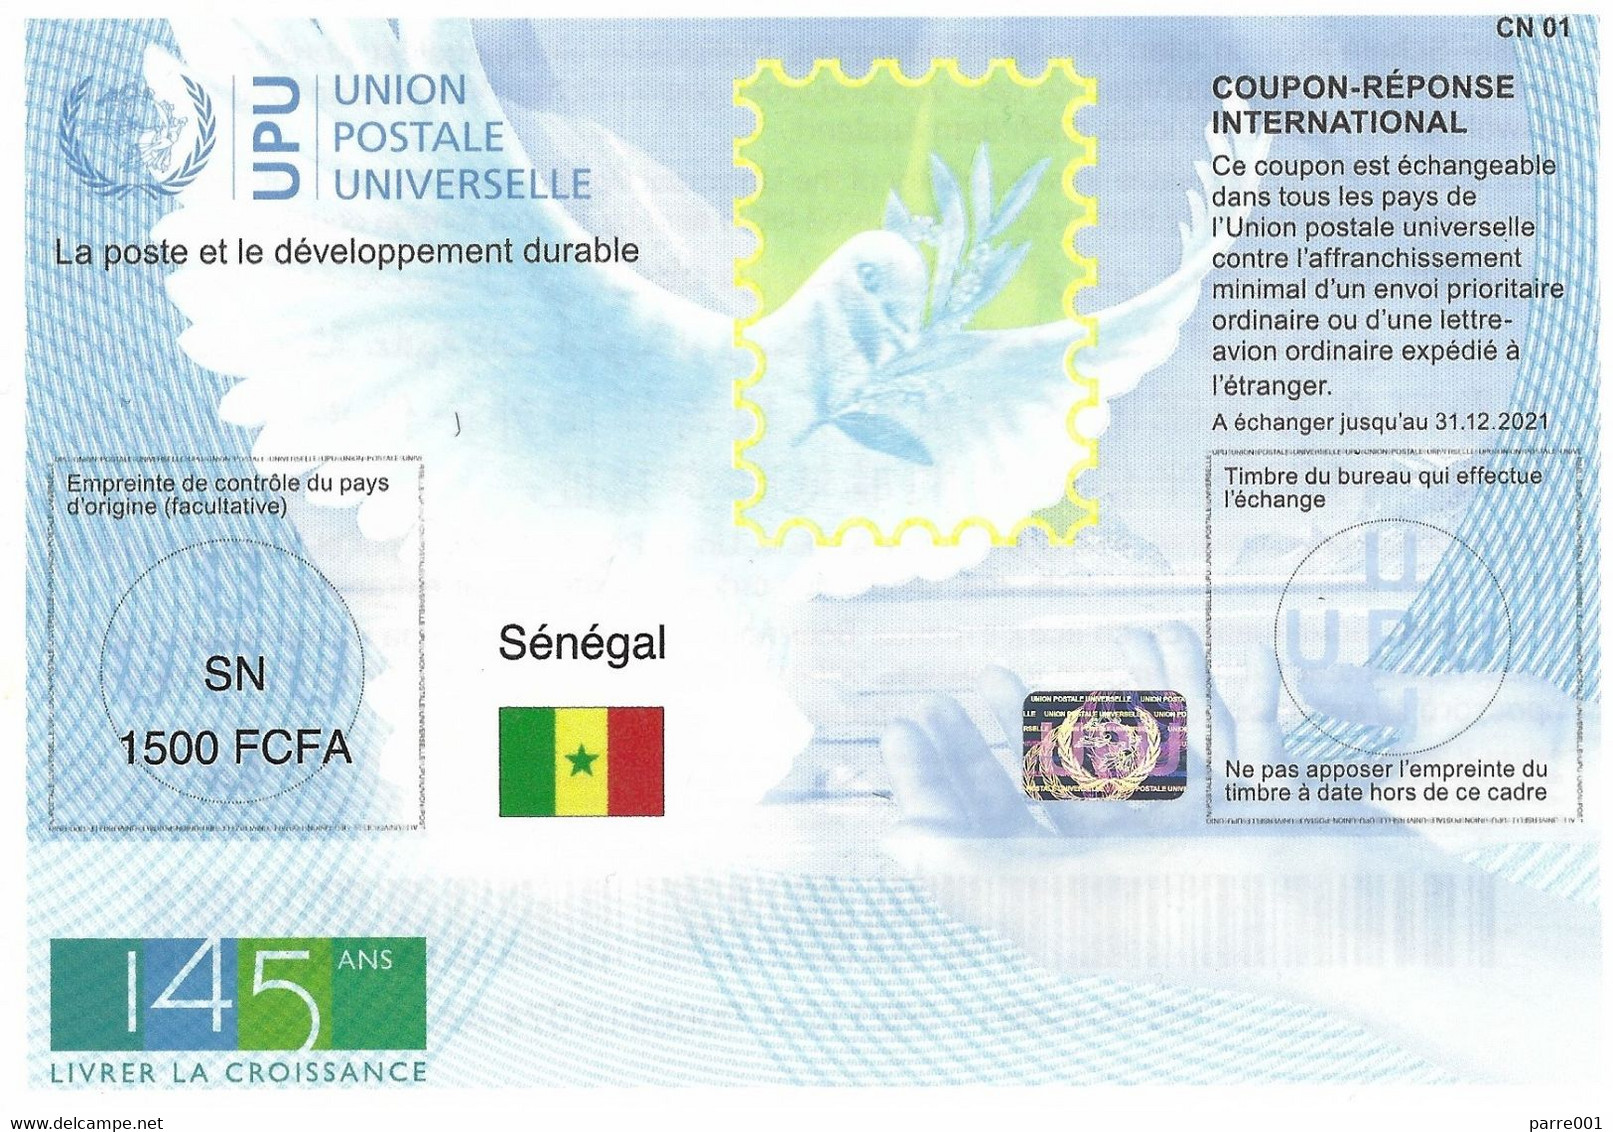 Senegal 2019 Reply Coupon Reponse 145 Ans UPU Hologram Type T37 IRC IAS Antwortschein - UPU (Unione Postale Universale)